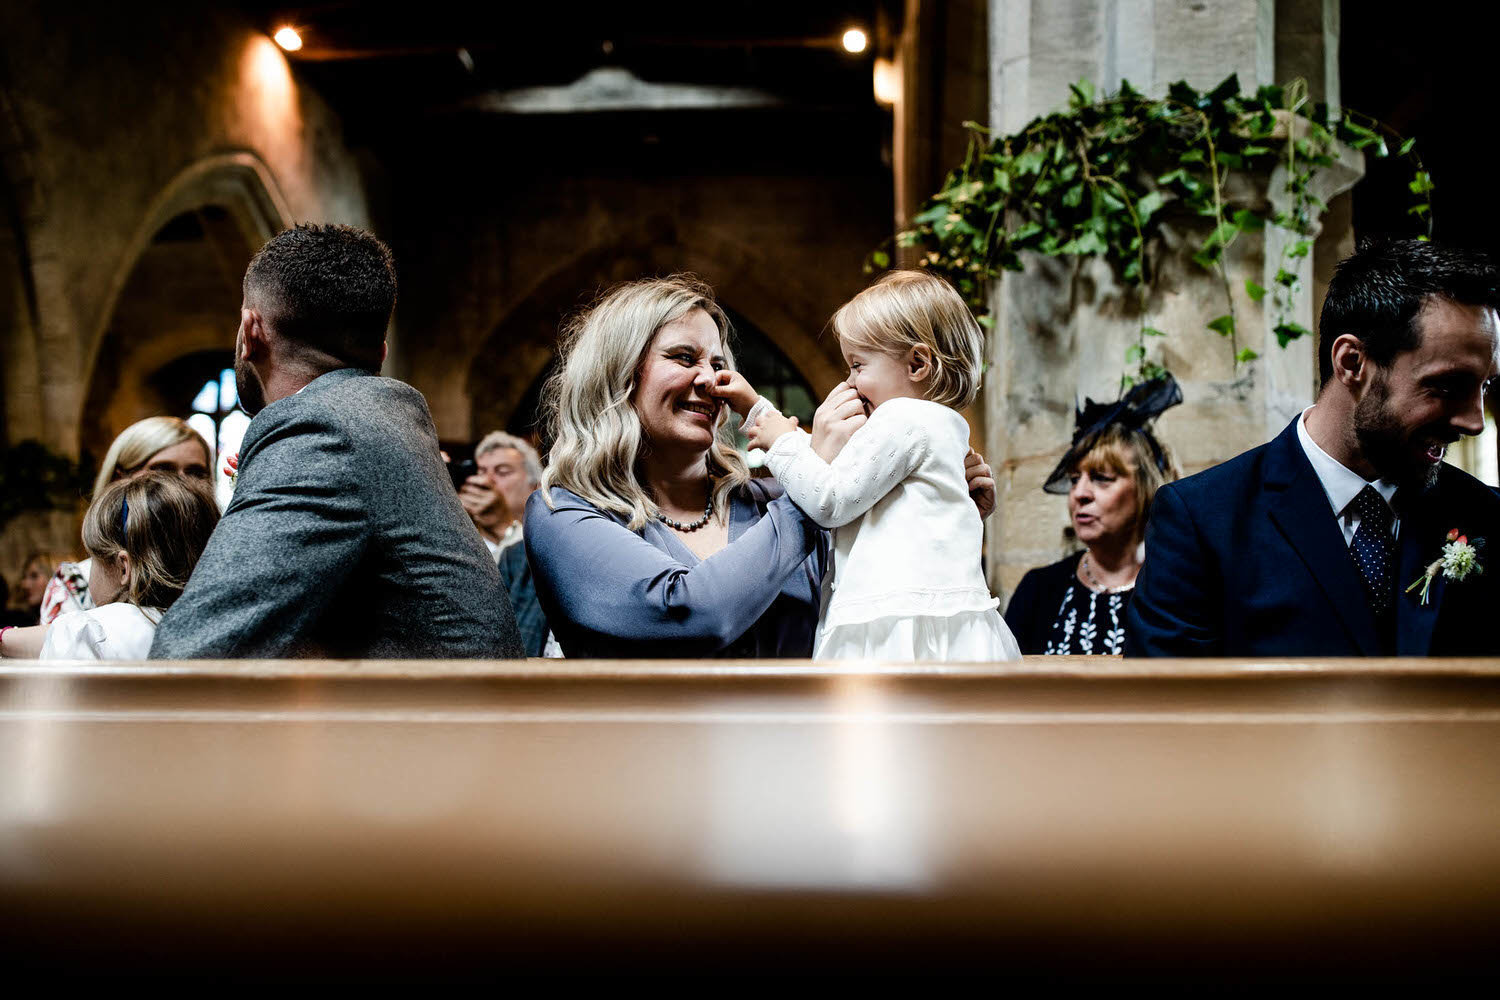 mother squishing noses with her daughter in church wedding ceremony